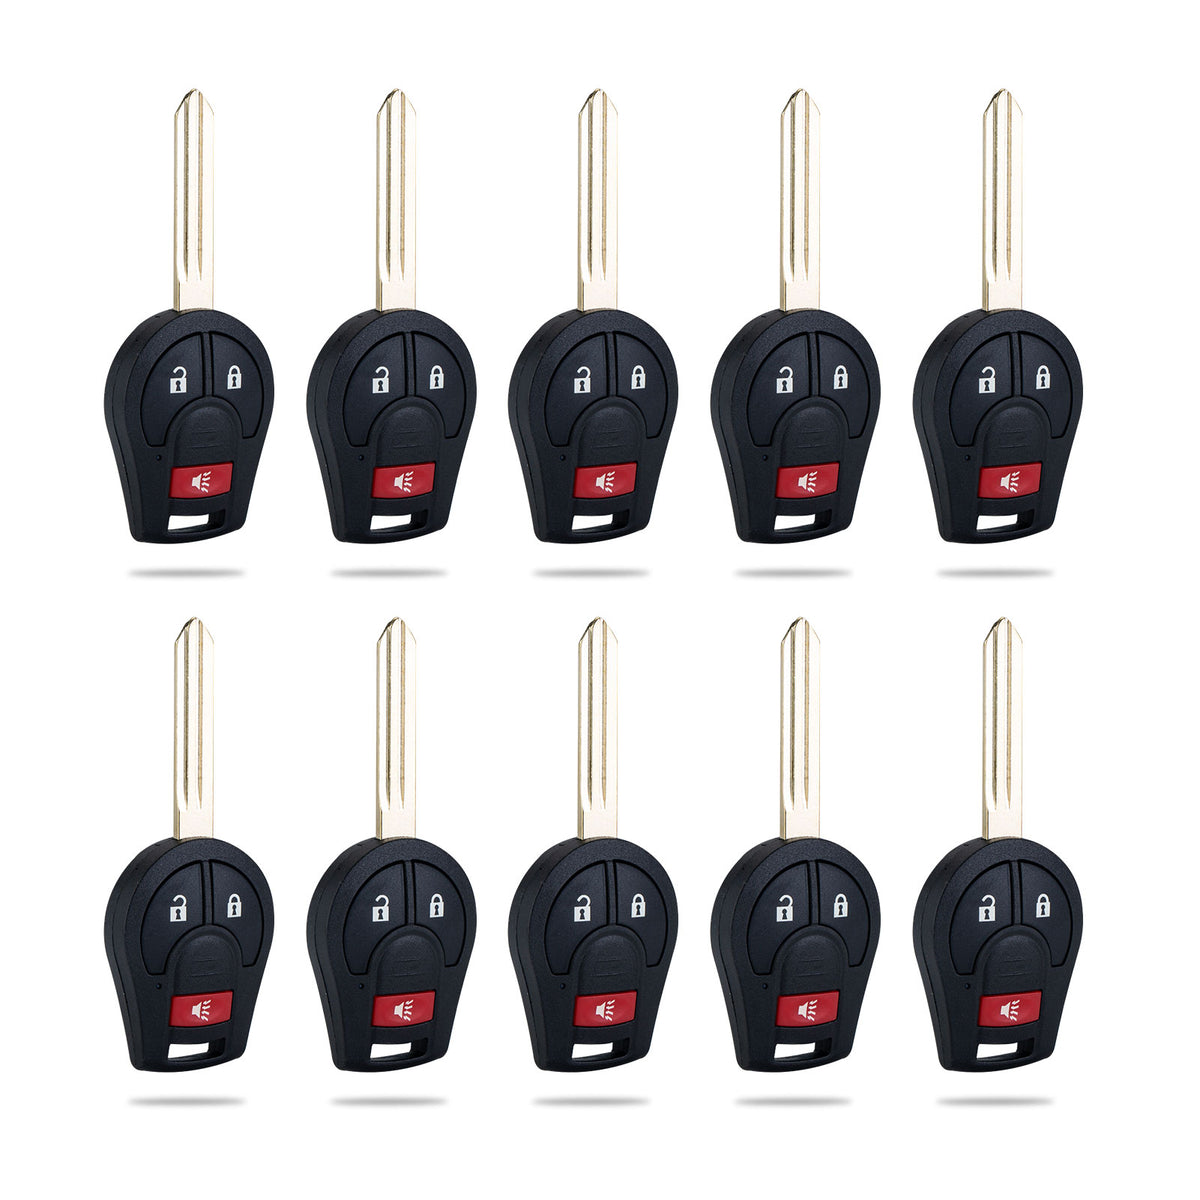 Lots of 10 Remote Car Key Fob Replacement for Nissan CWTWB1U751 fits 2009 2010 2011 2012 2013 2014 Cube